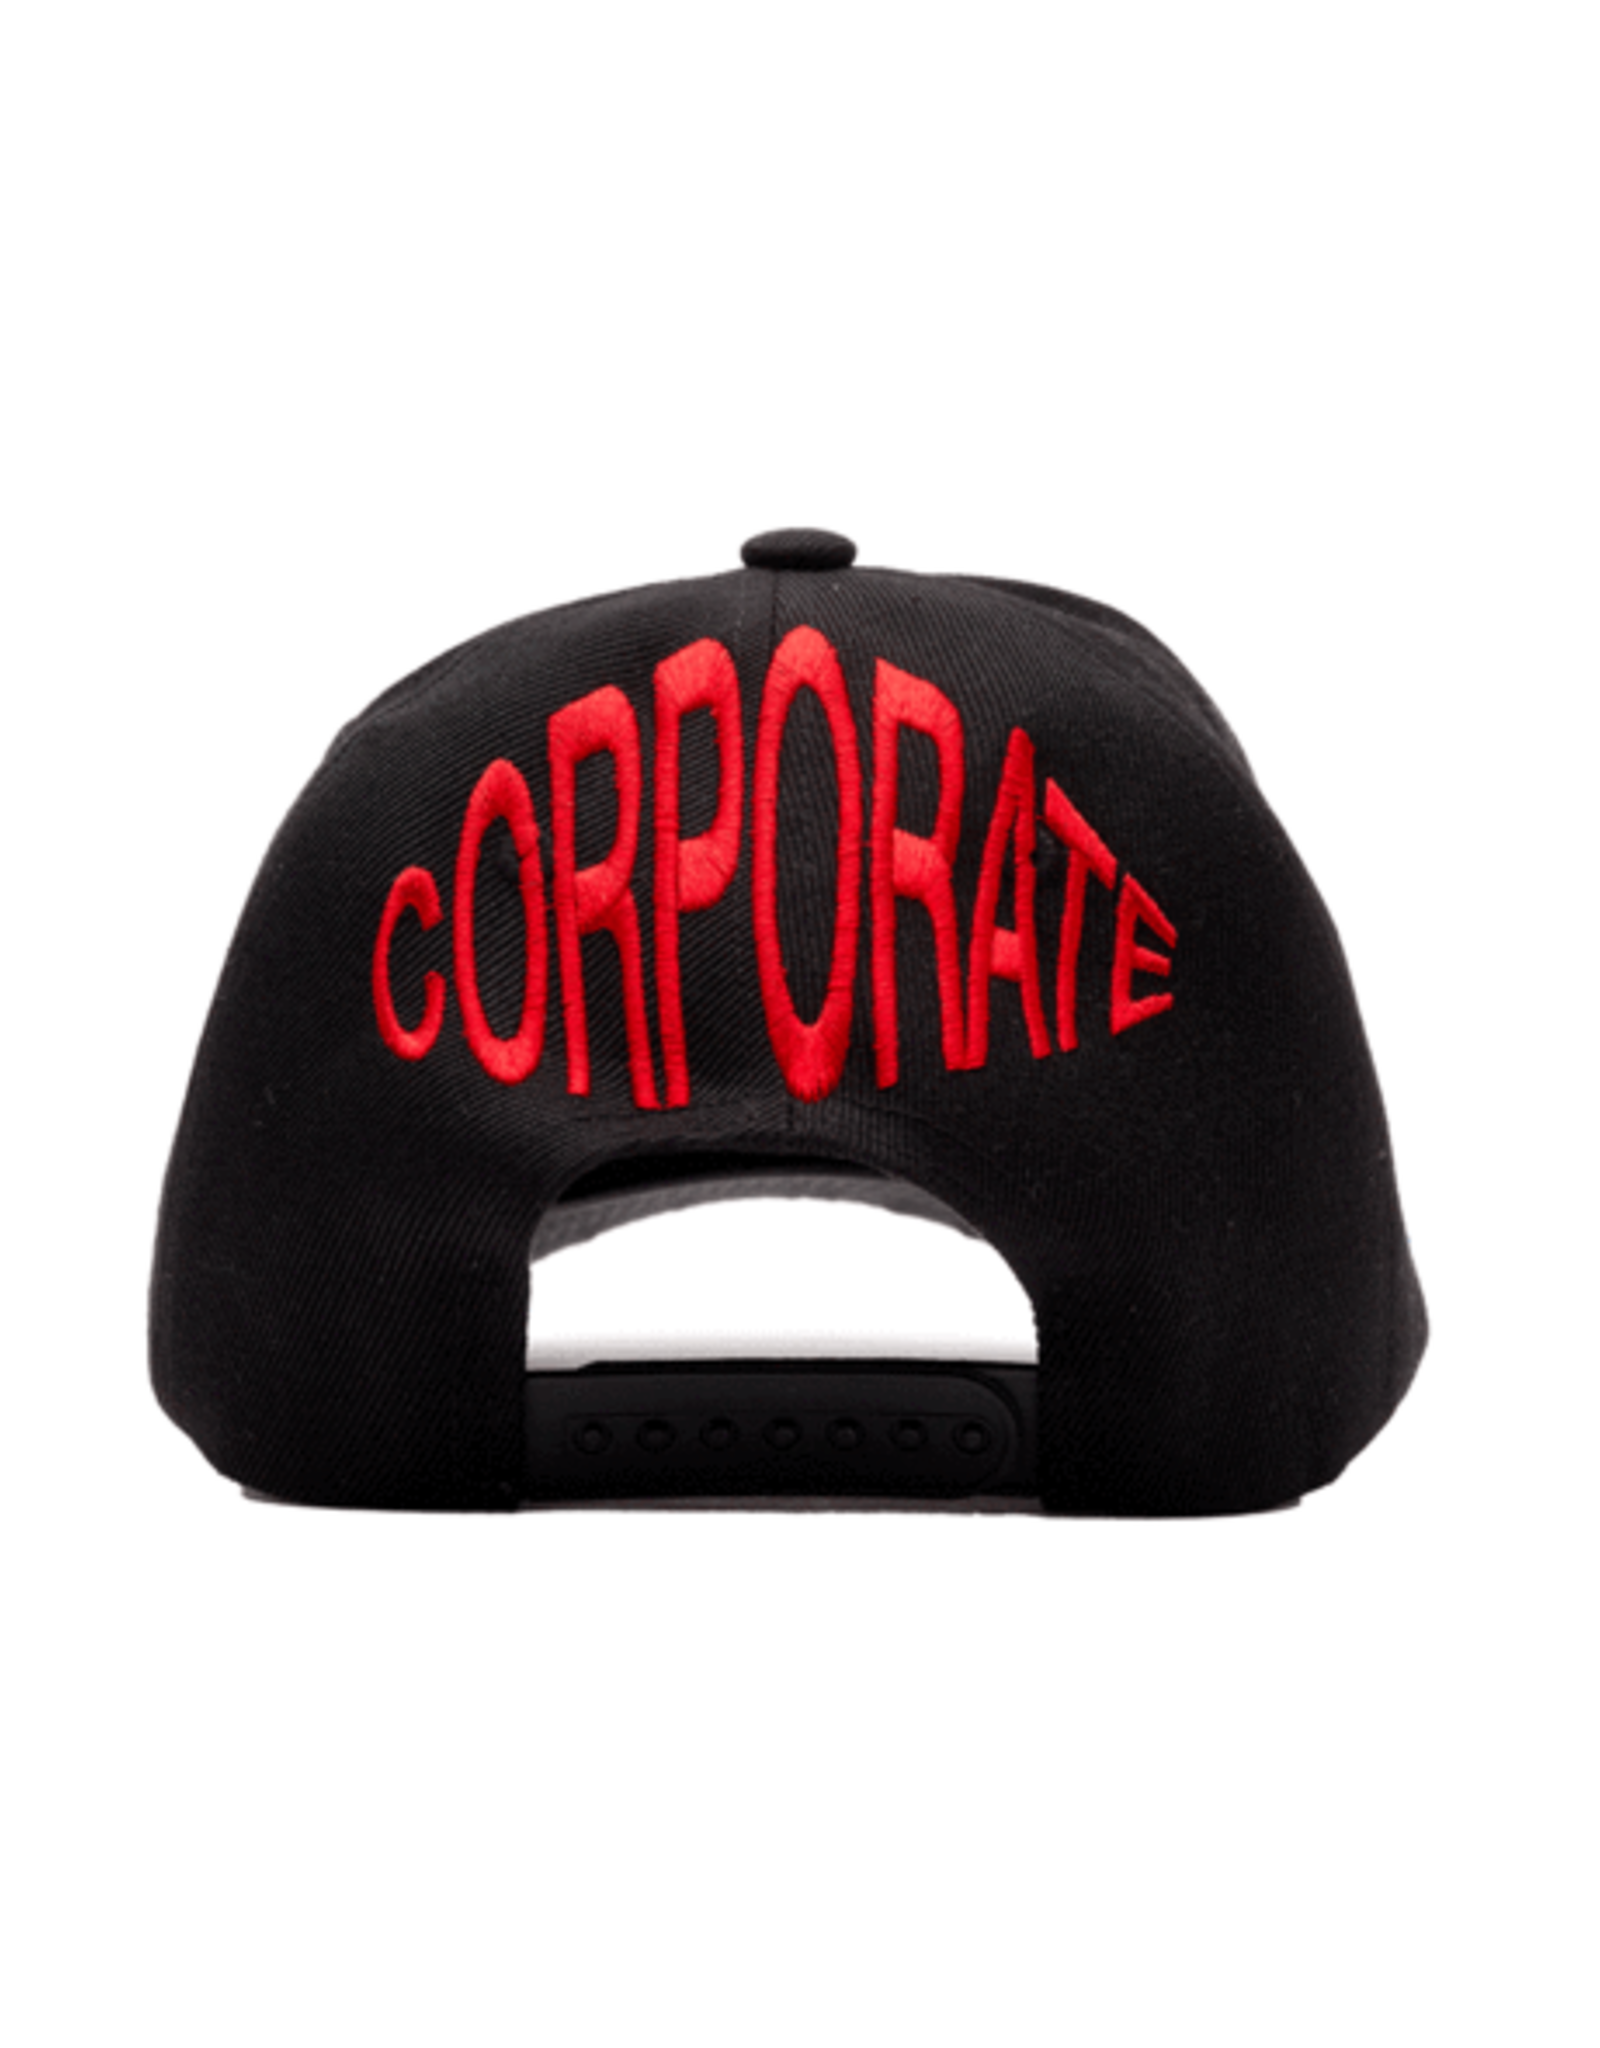 CORPORATE SKATEBOARDS CORPORATE LOOK AT ME BITCH HAT - BLACK